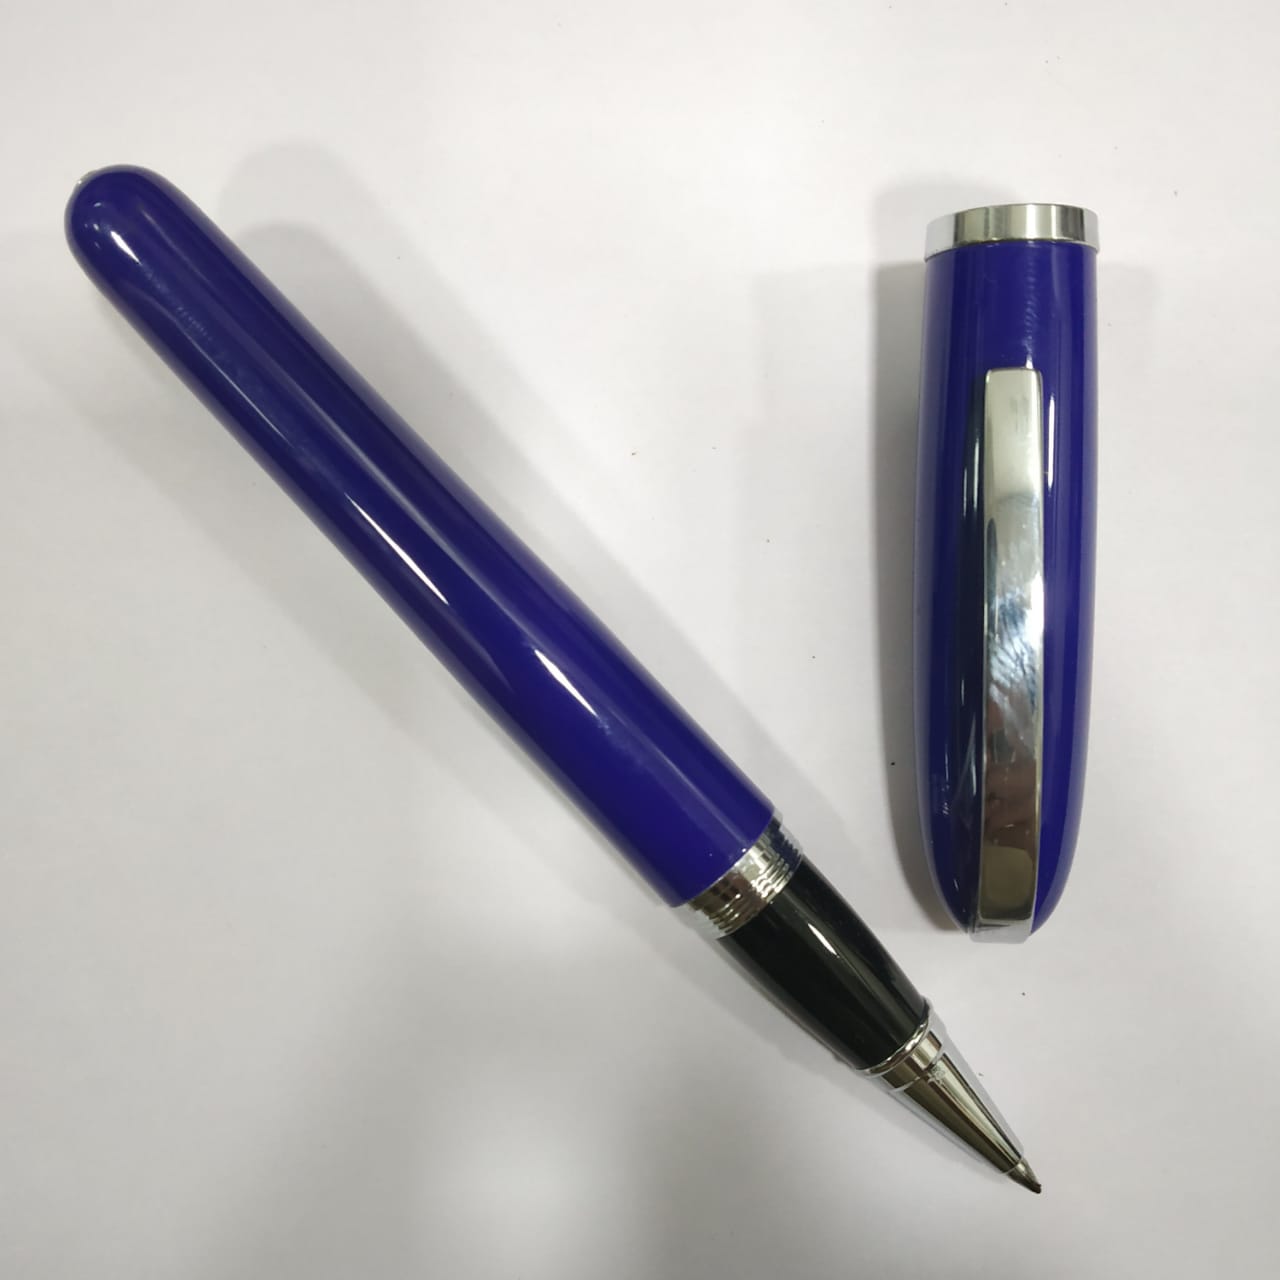 Baoer No 79 Lacquered Blue Rollerball Pen with Chrome Trim